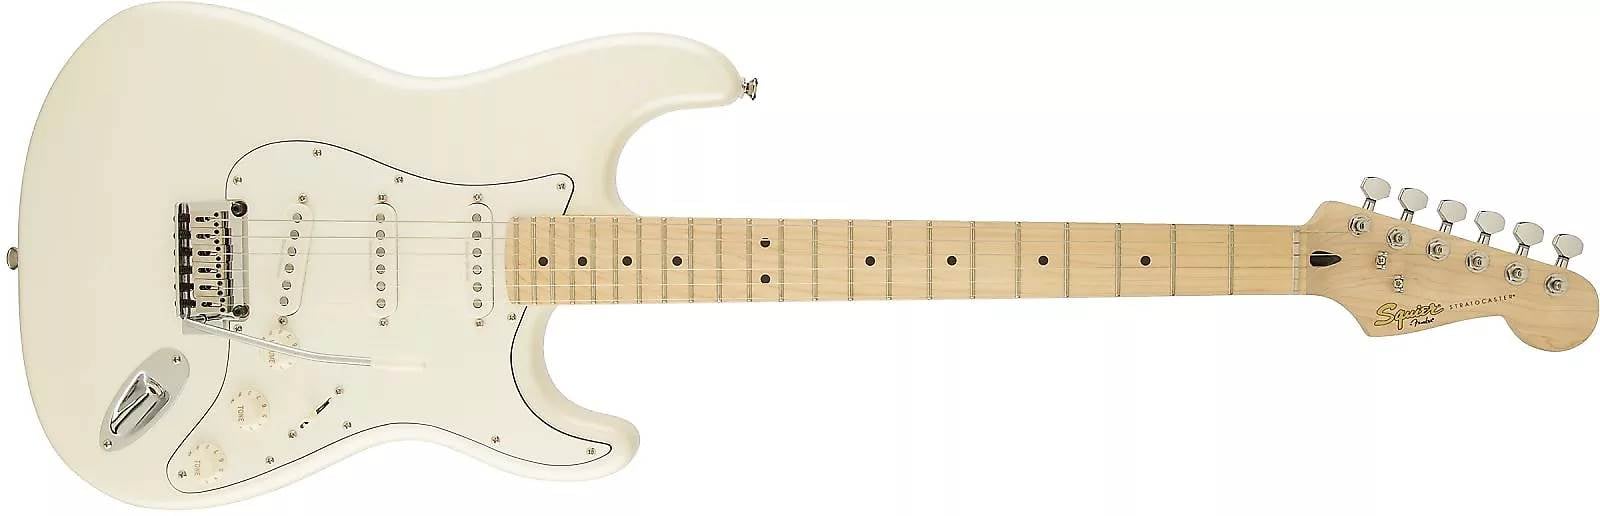 Early Squier Deluxe Stratocaster Pearl White Metallic